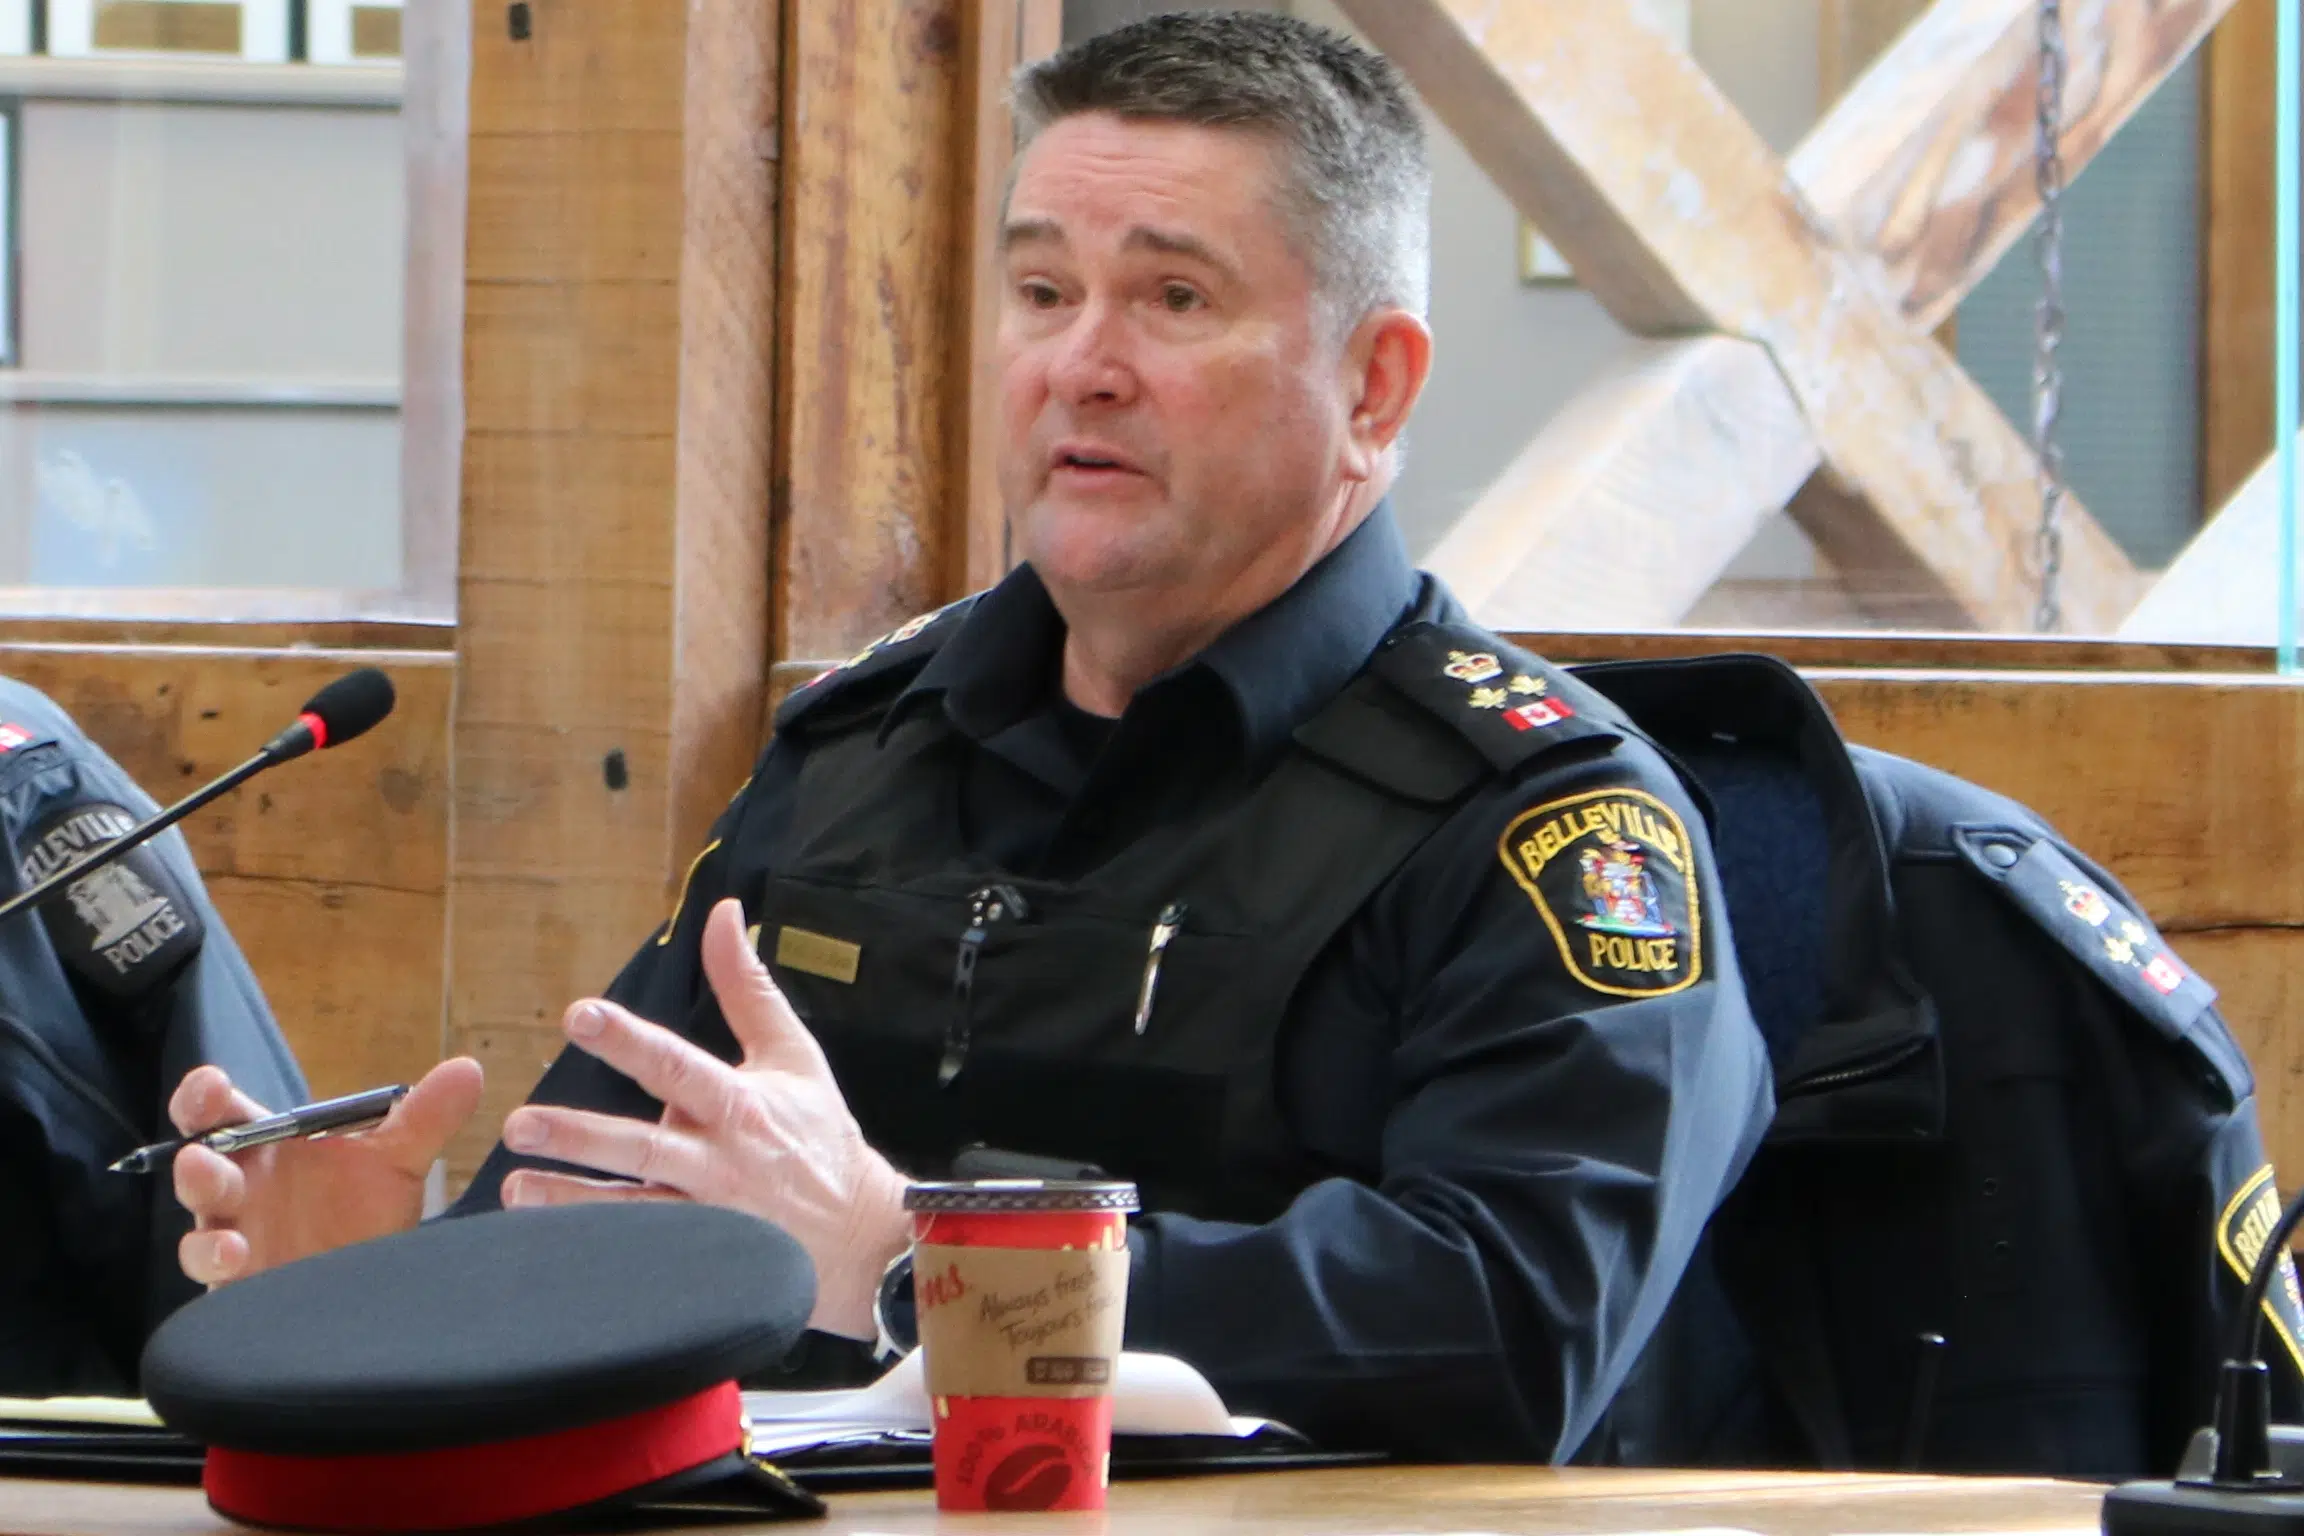 Belleville Police Chief says he's always willing to hear residents concerns